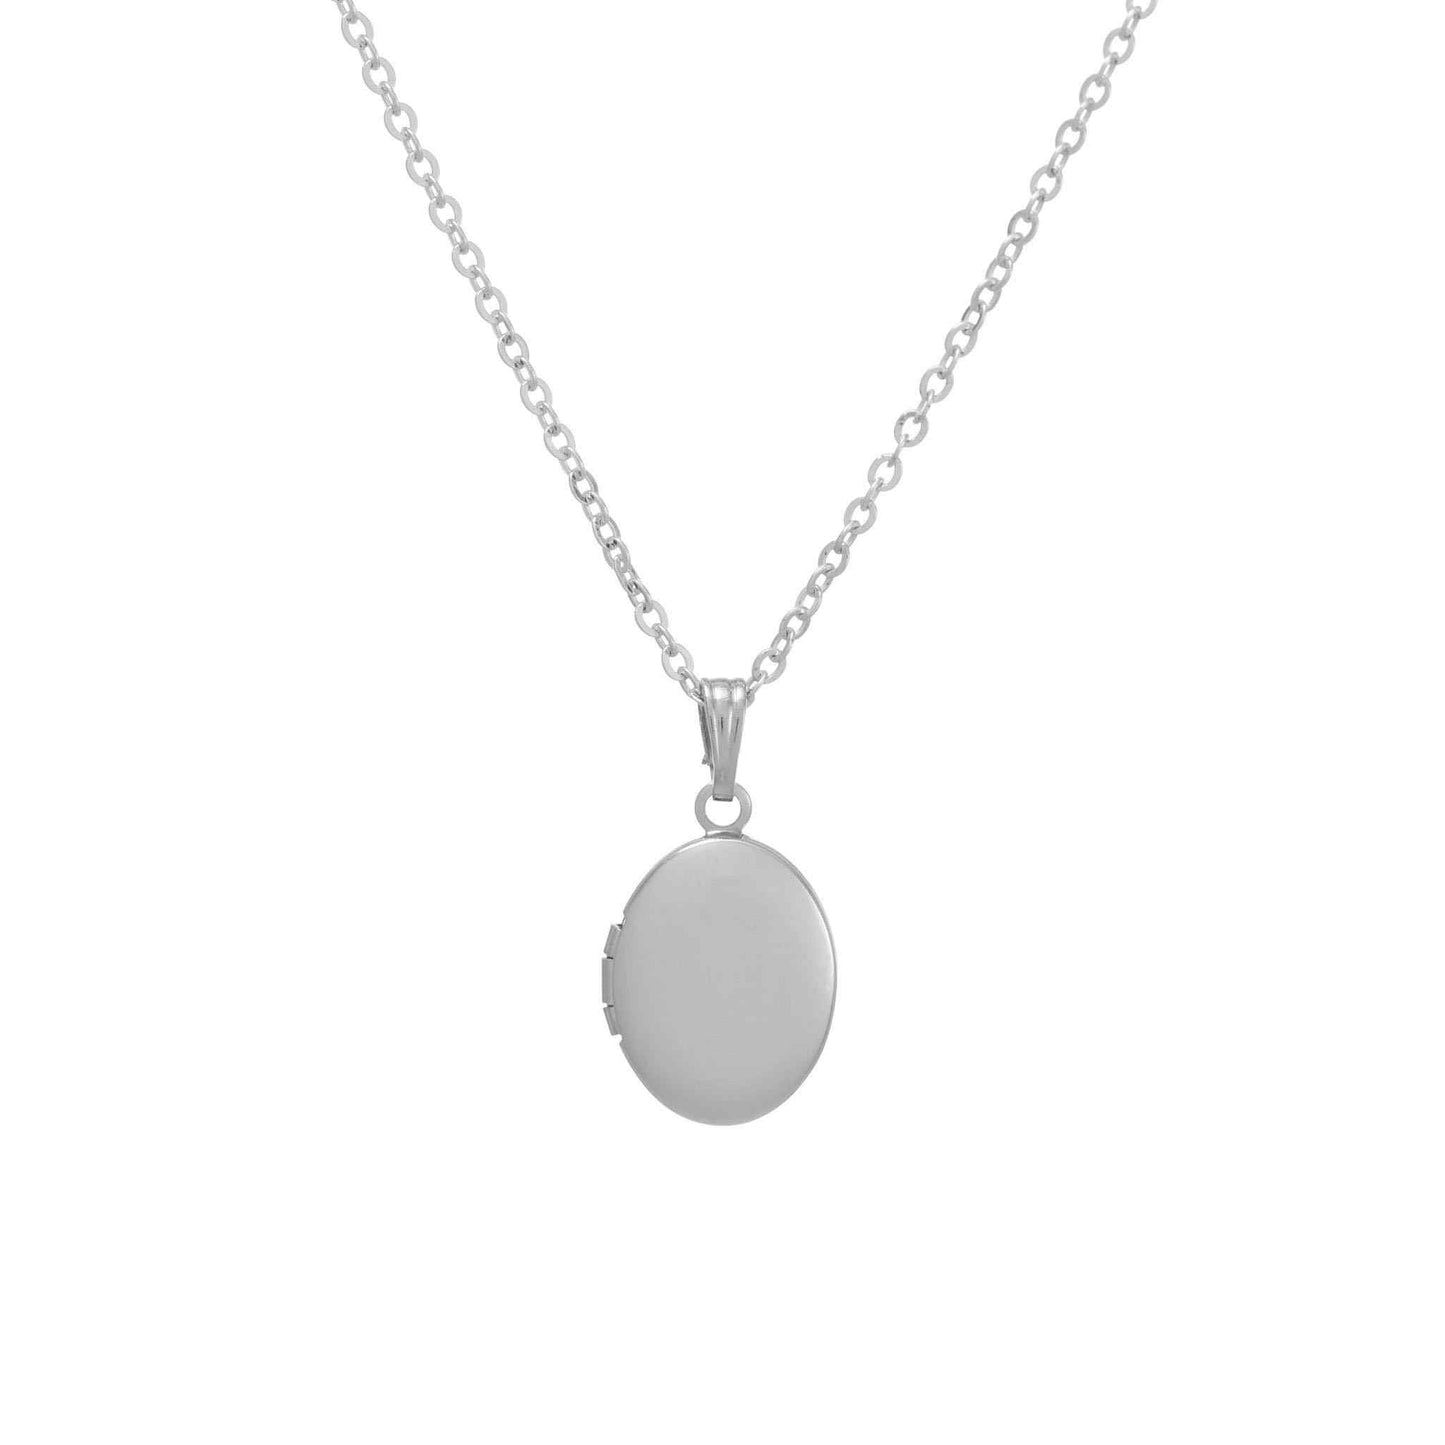 A classic locket necklace displayed on a neutral white background.